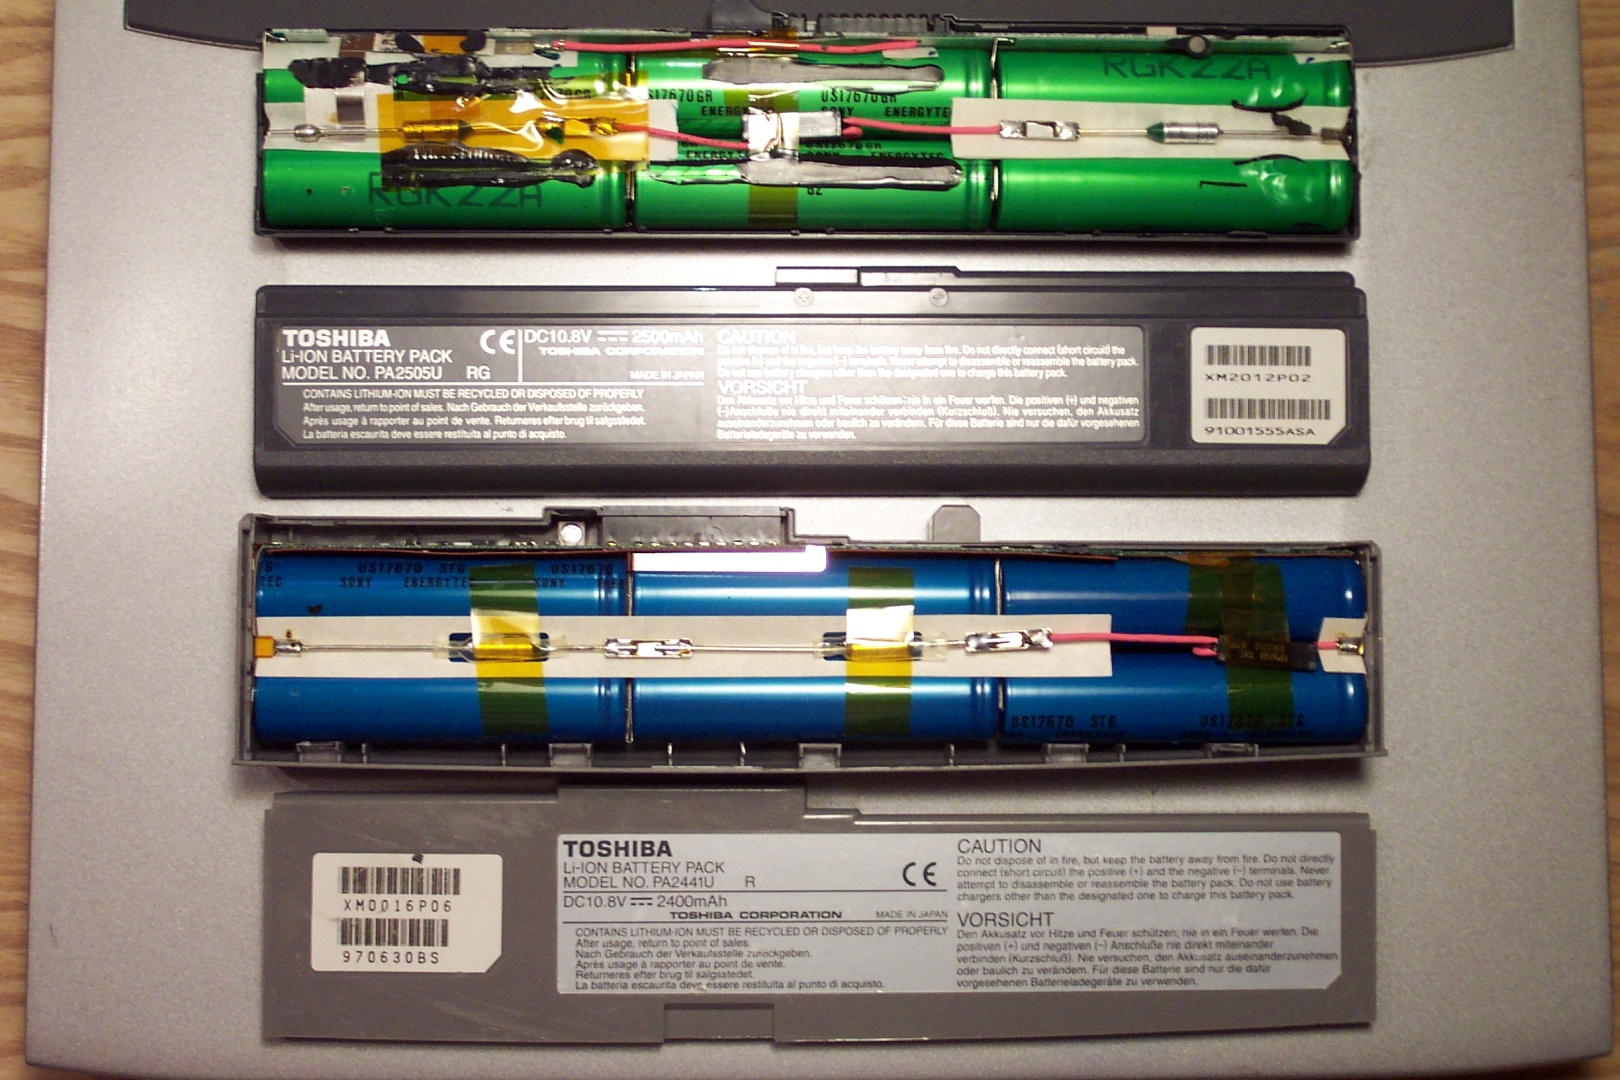 Two laptop batteries, with part of the casing removed. Each pack has six 18650 cells, one pack has green cells, one pack has blue cells.